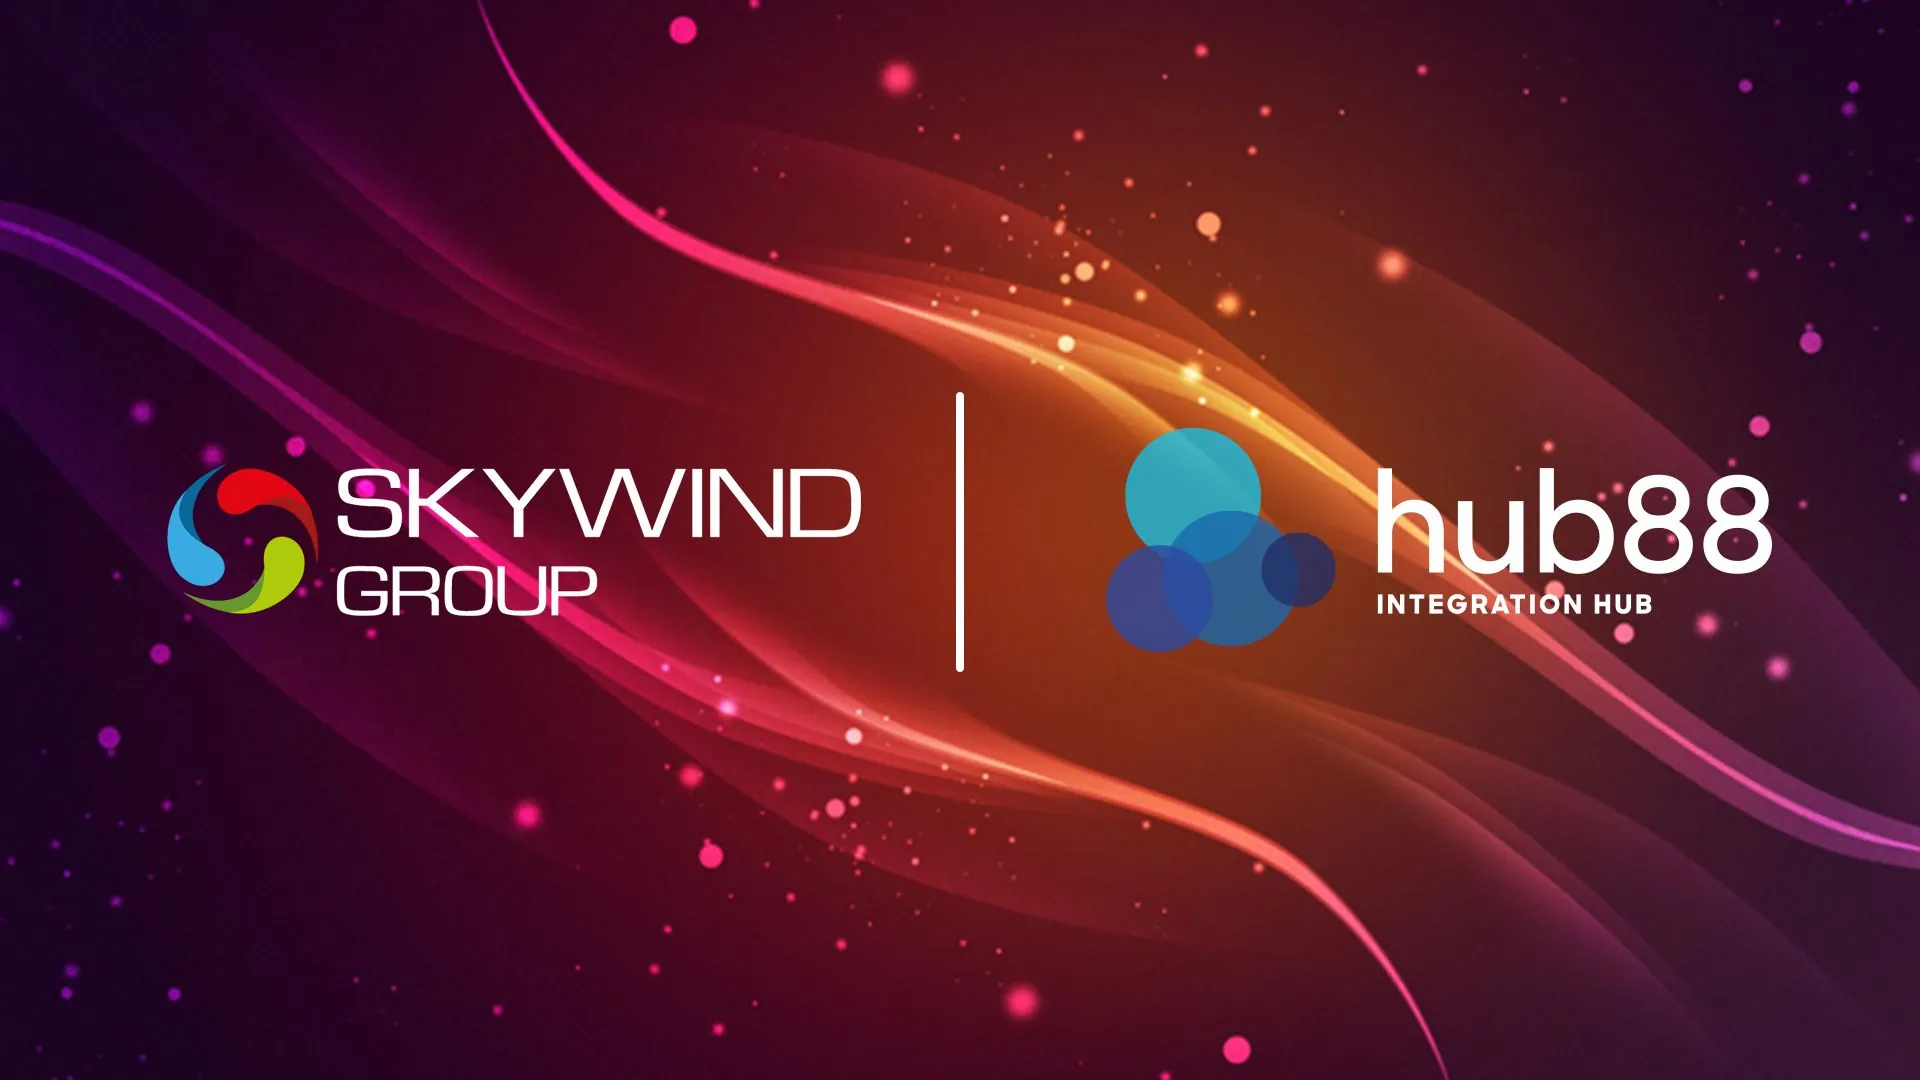 Skywind Group Becomes a Game Content Supplier With  Hub88